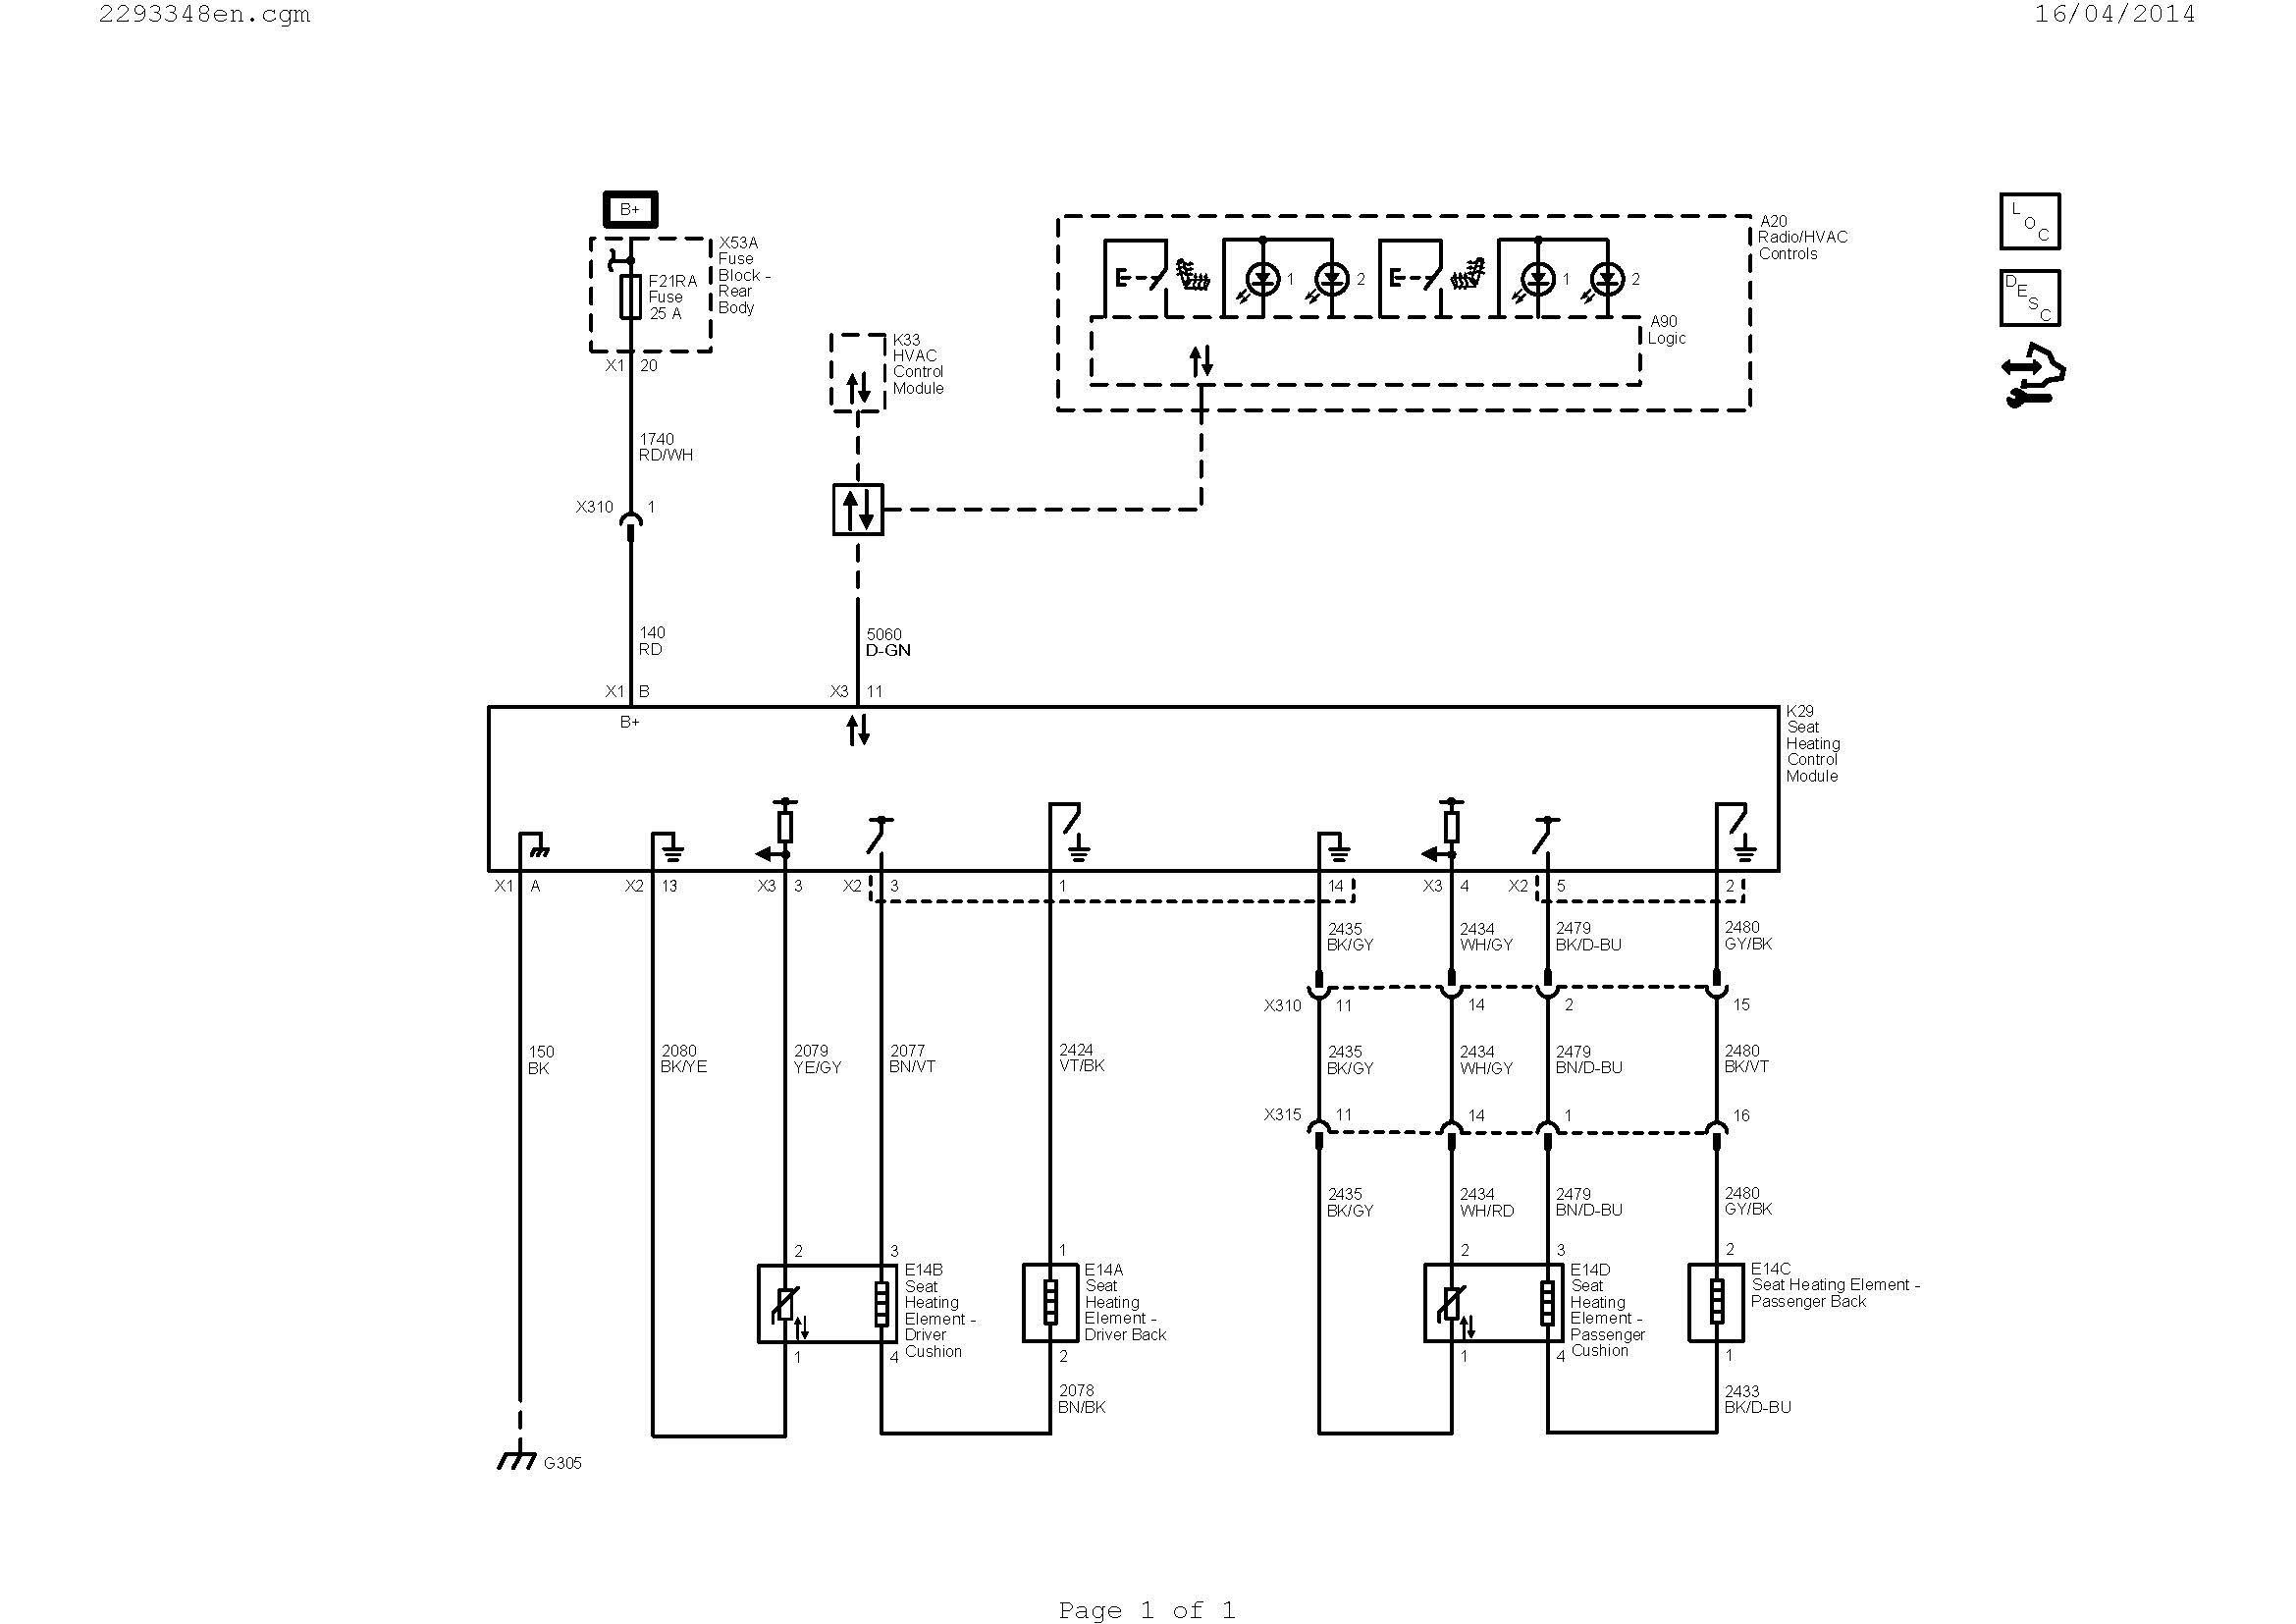 Wiring Diagram For Furnace With Ac Best Furnace Parts Diagram New Hvac Diagram Best Hvac Diagram 0d – Wire